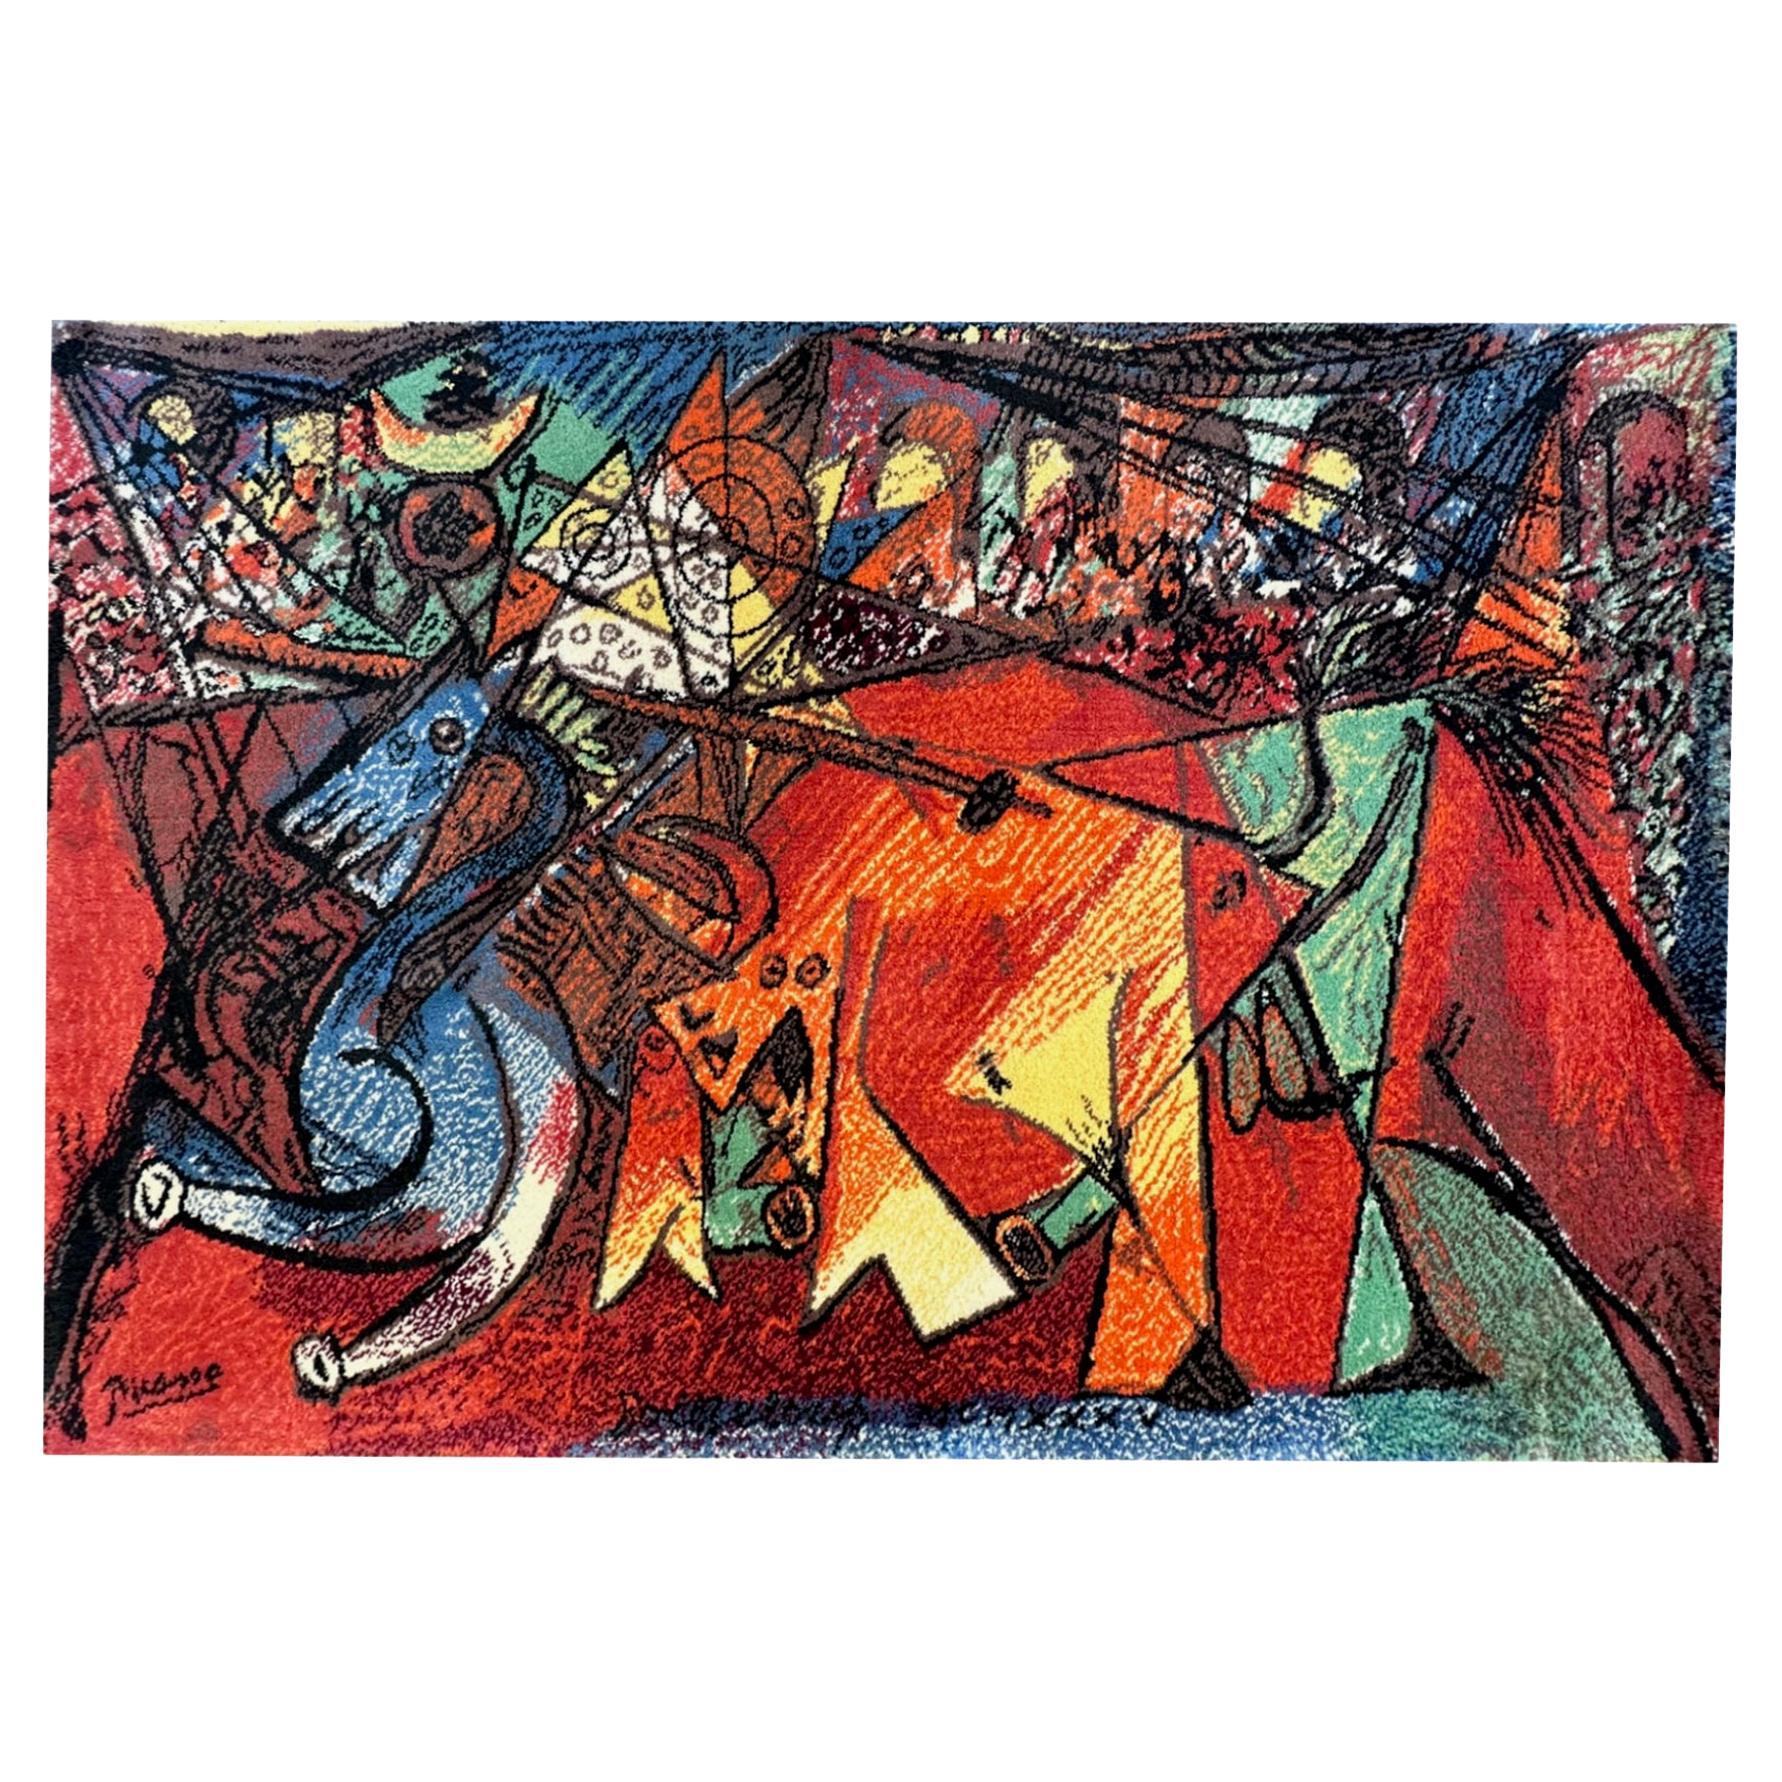 Pablo Picasso "Running of the Bulls" 1994 Ege Axminster Wool Rug For Sale